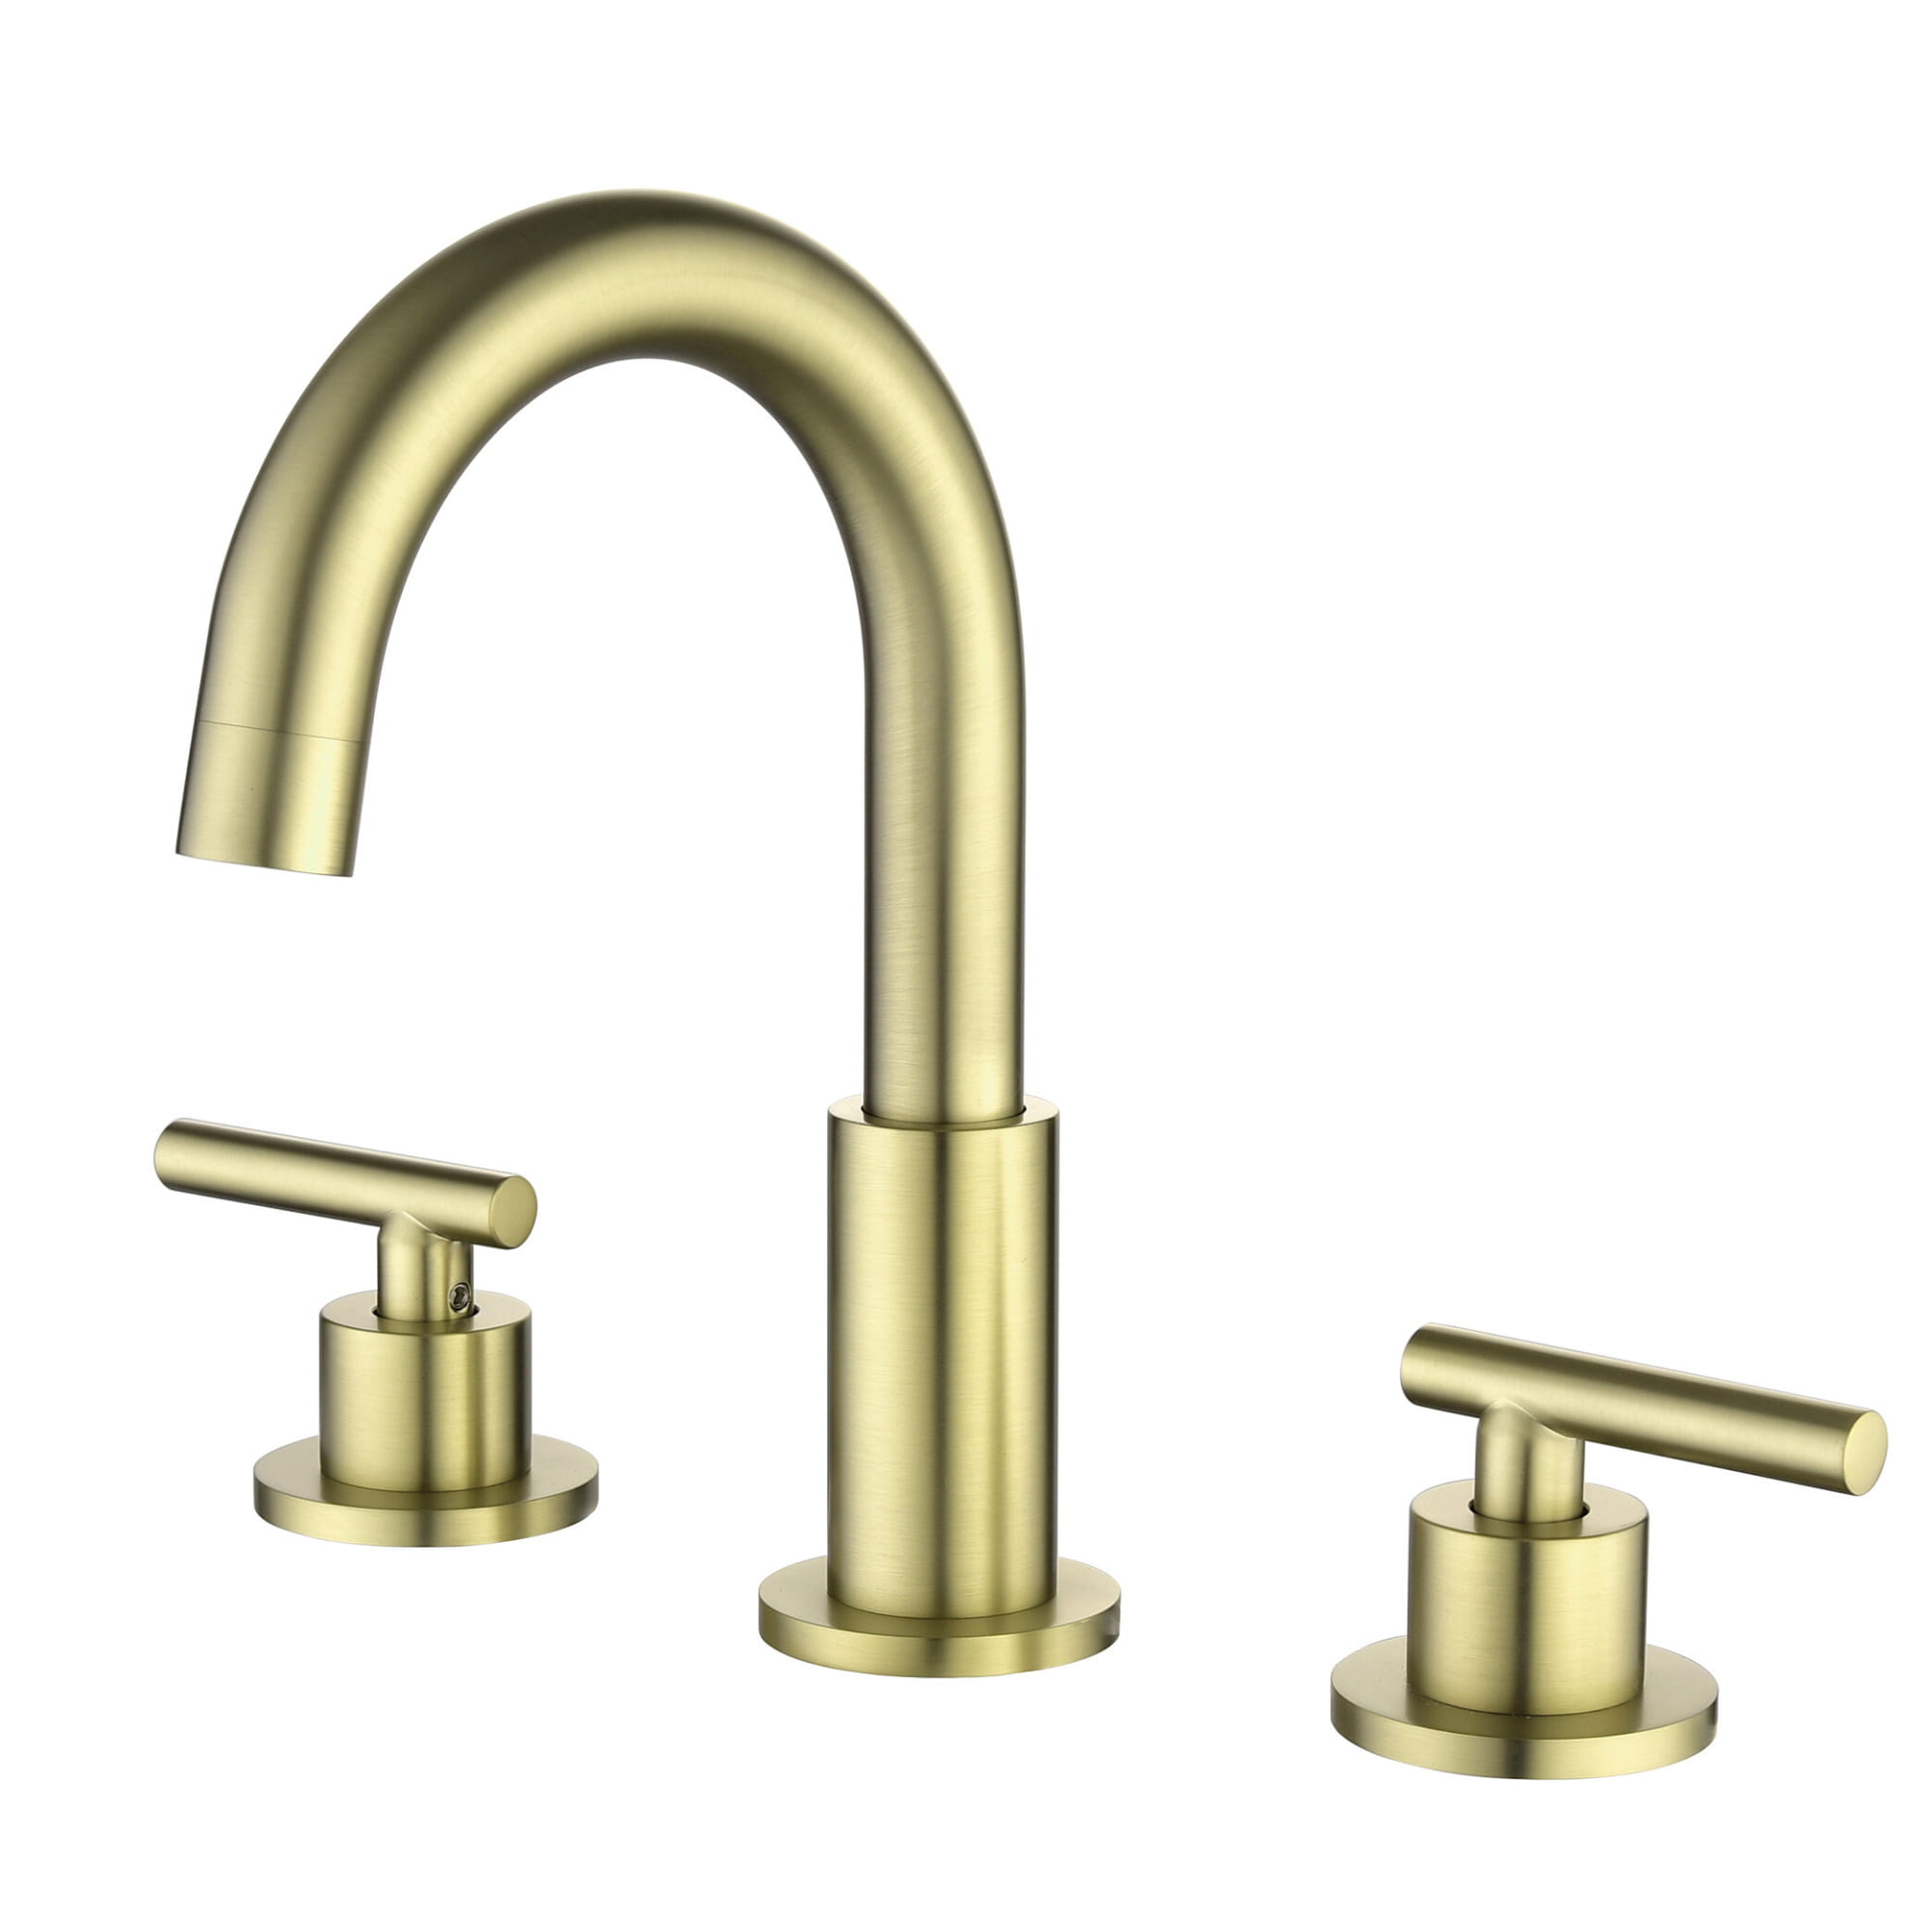 Boyel Living Widespread 2-Handle Bathroom Sink Faucet with Valve and Drain Assembly in Brushed Gold 8 In.-Boyel Living